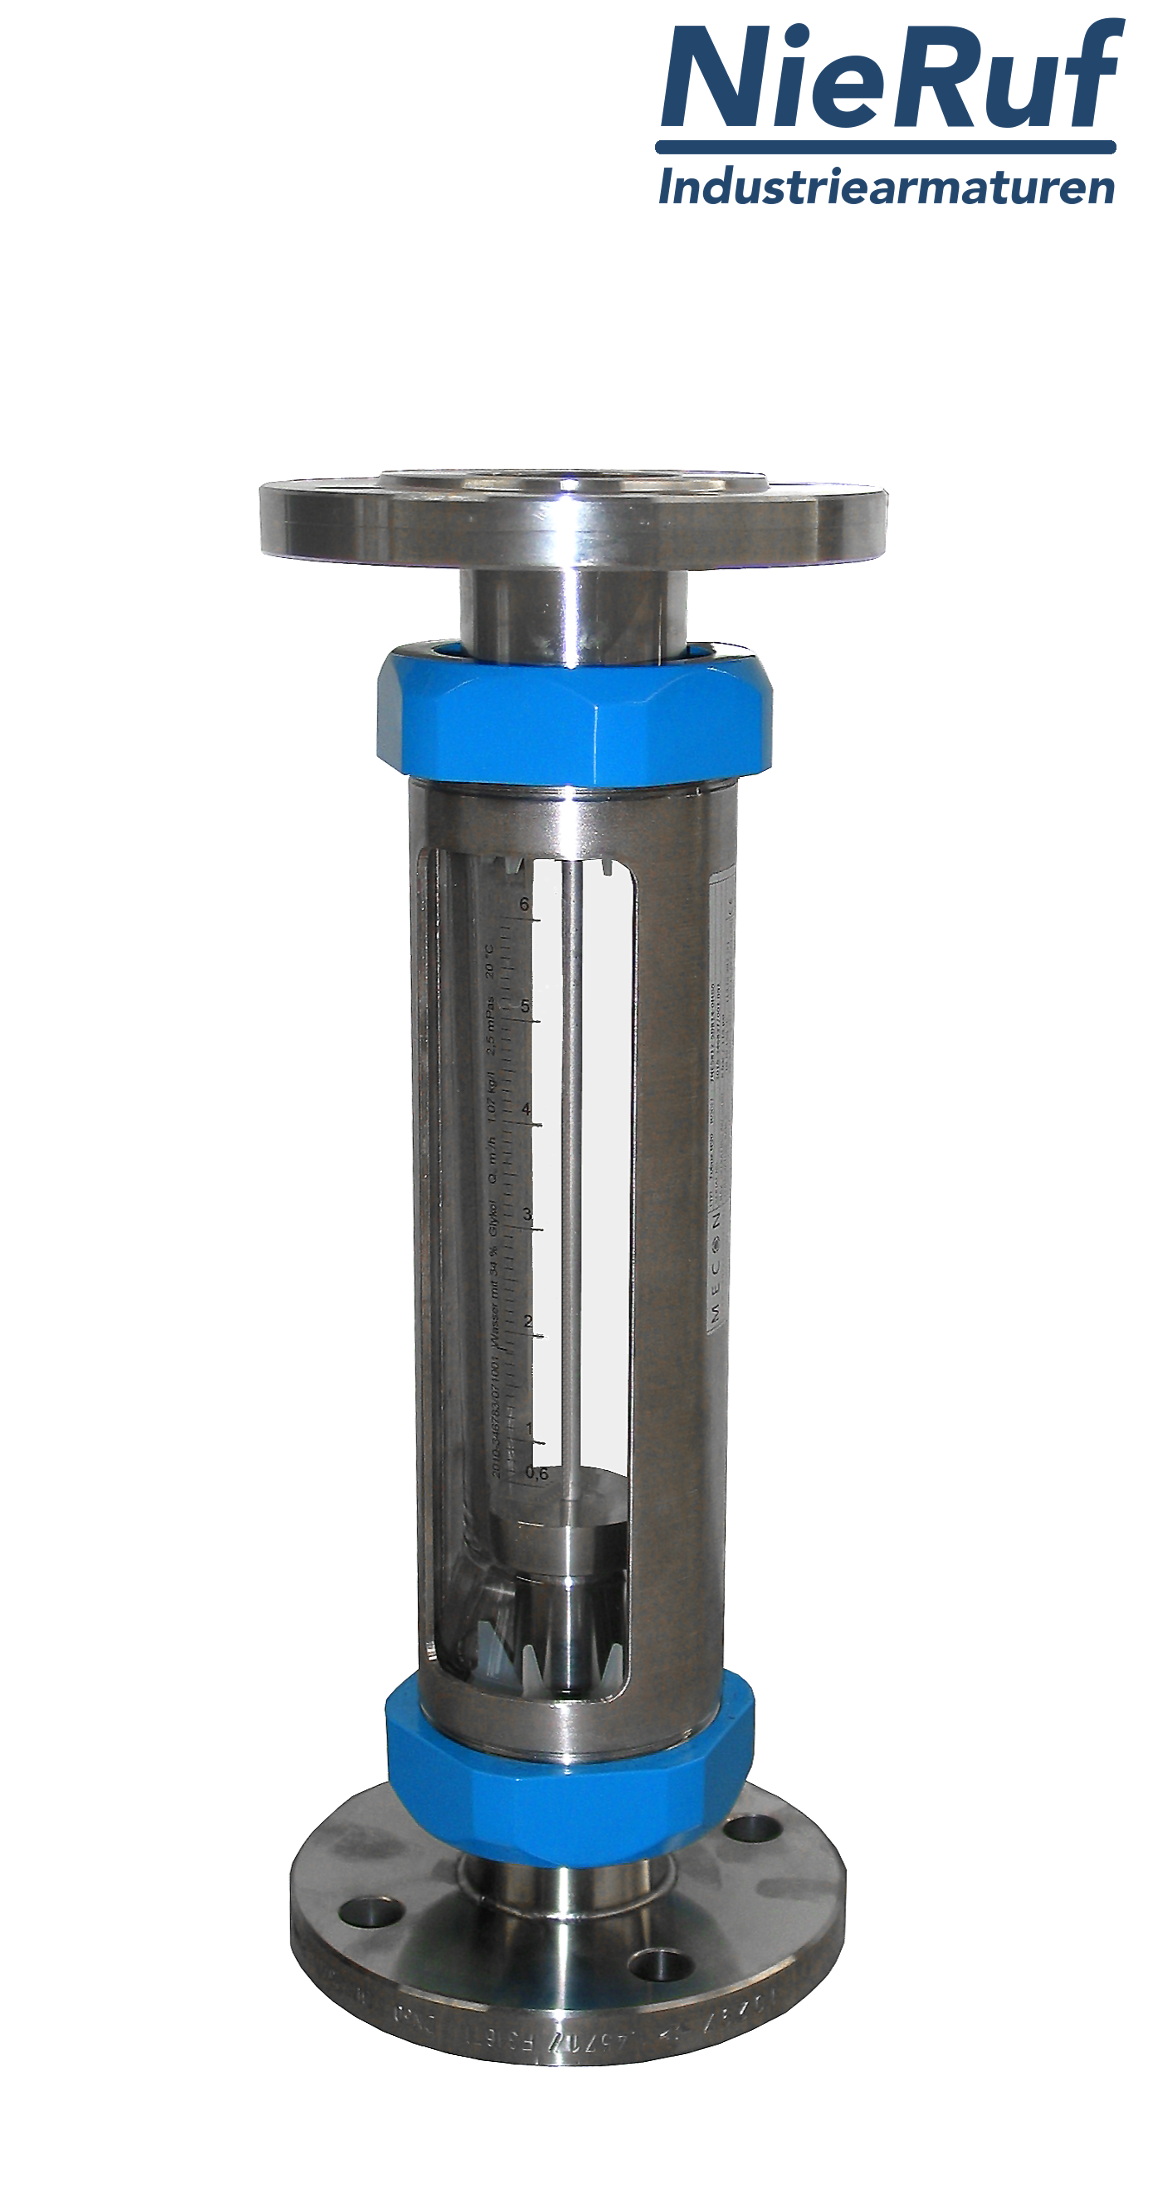 Variable area flowmeter stainless steel + borosilicate flange DN50 250.0 - 2500 l/h water FKM